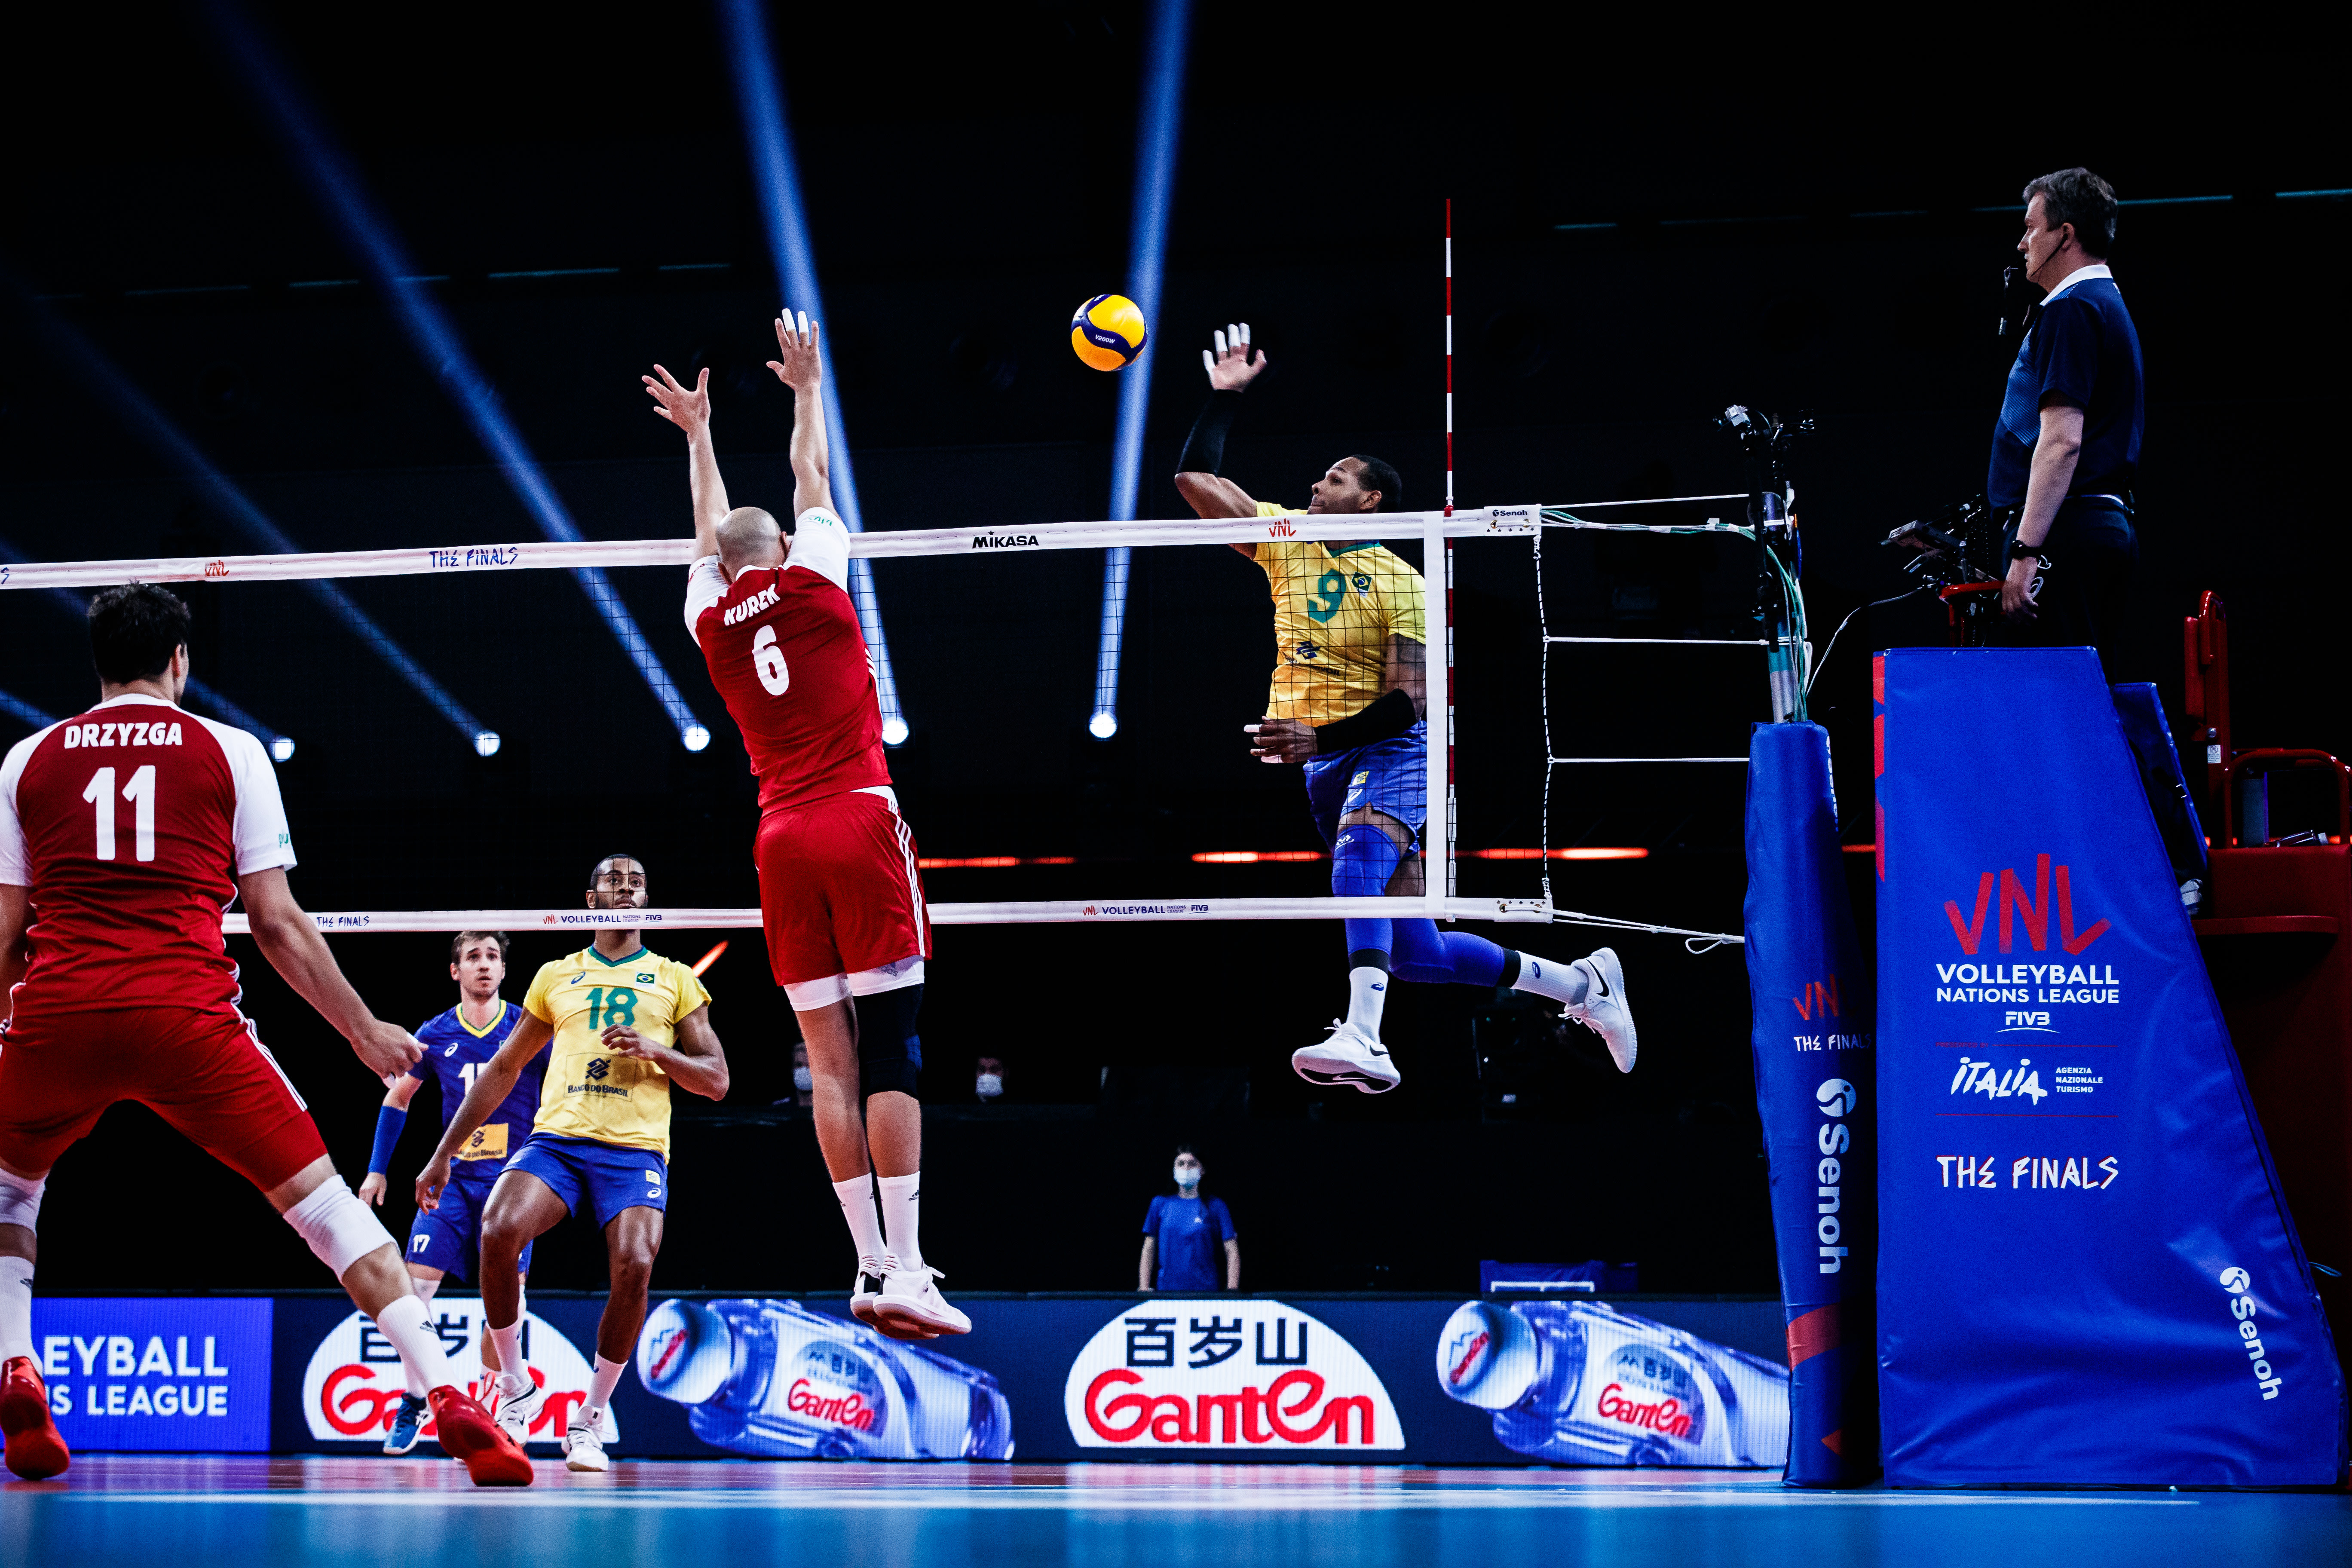 Reinforced Brazil and Poland to meet in remake of last VNL final volleyballworld